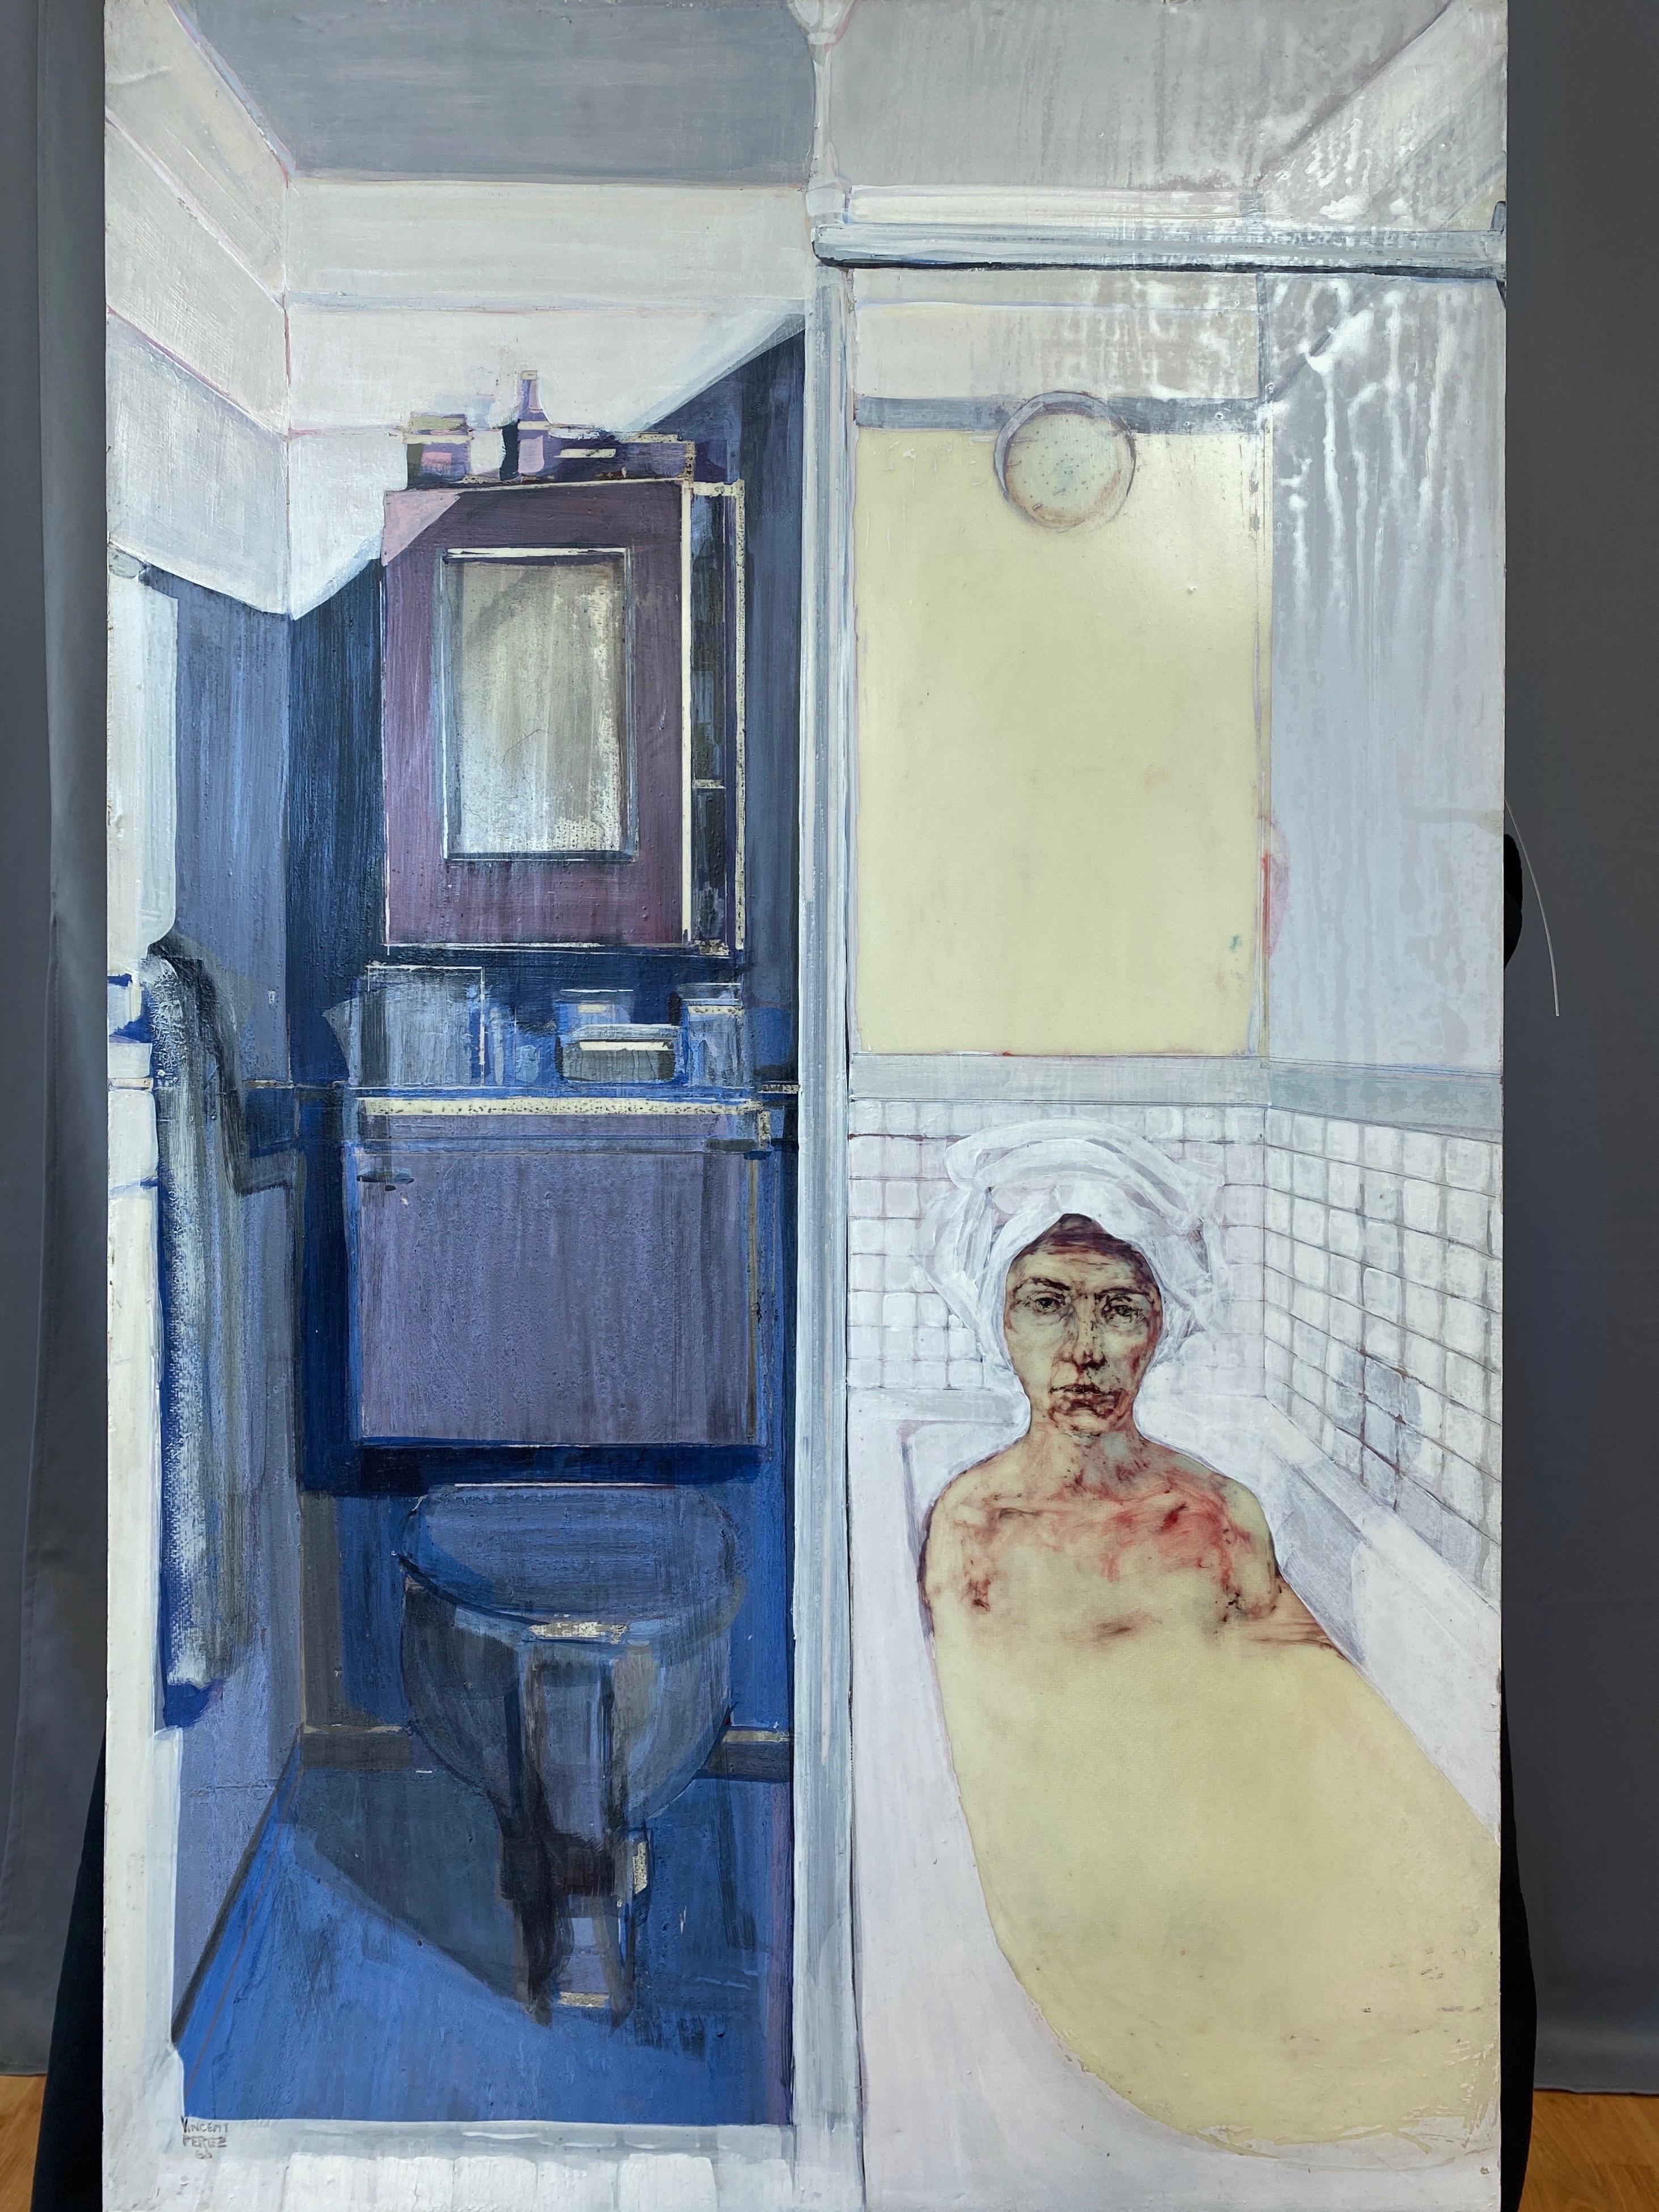 A large and arresting 1966 expressionist portrait oil painting on panel depicting a bathing woman by important San Francisco Bay Area artist and educator Vincent Perez.

Quotidian scene set in a compact bathroom displays a masterful handling of